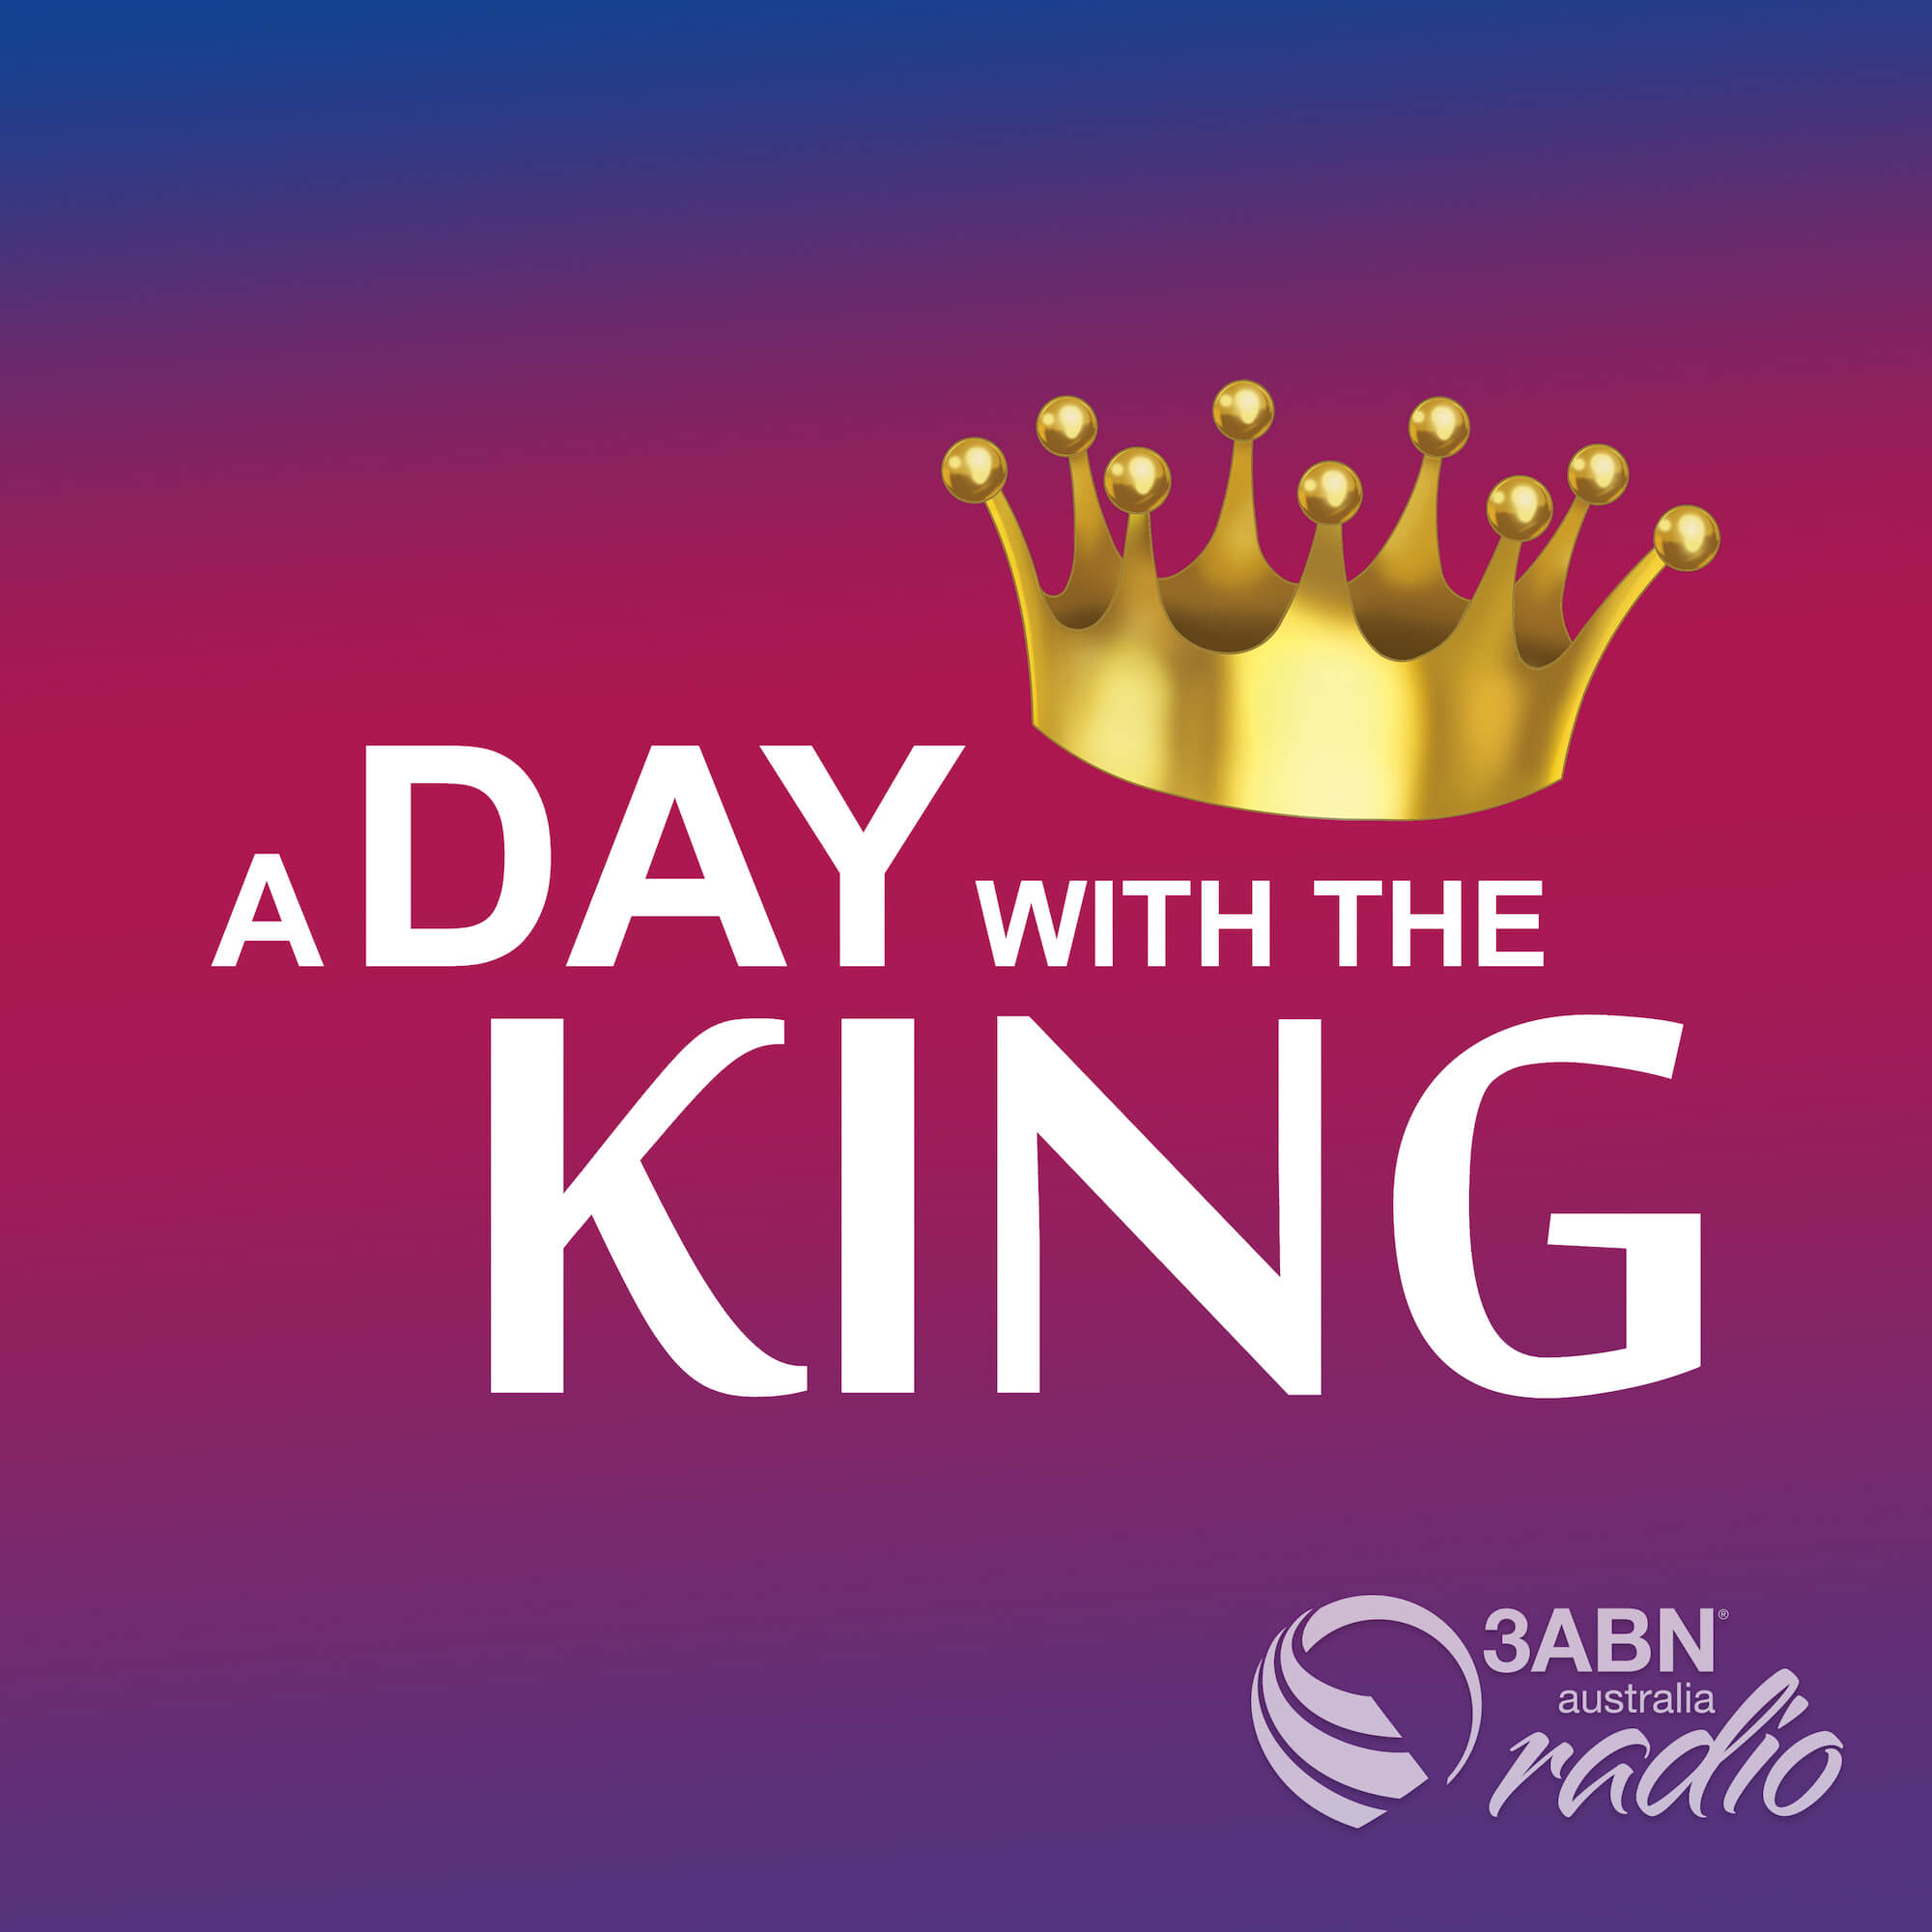 A Day With the King